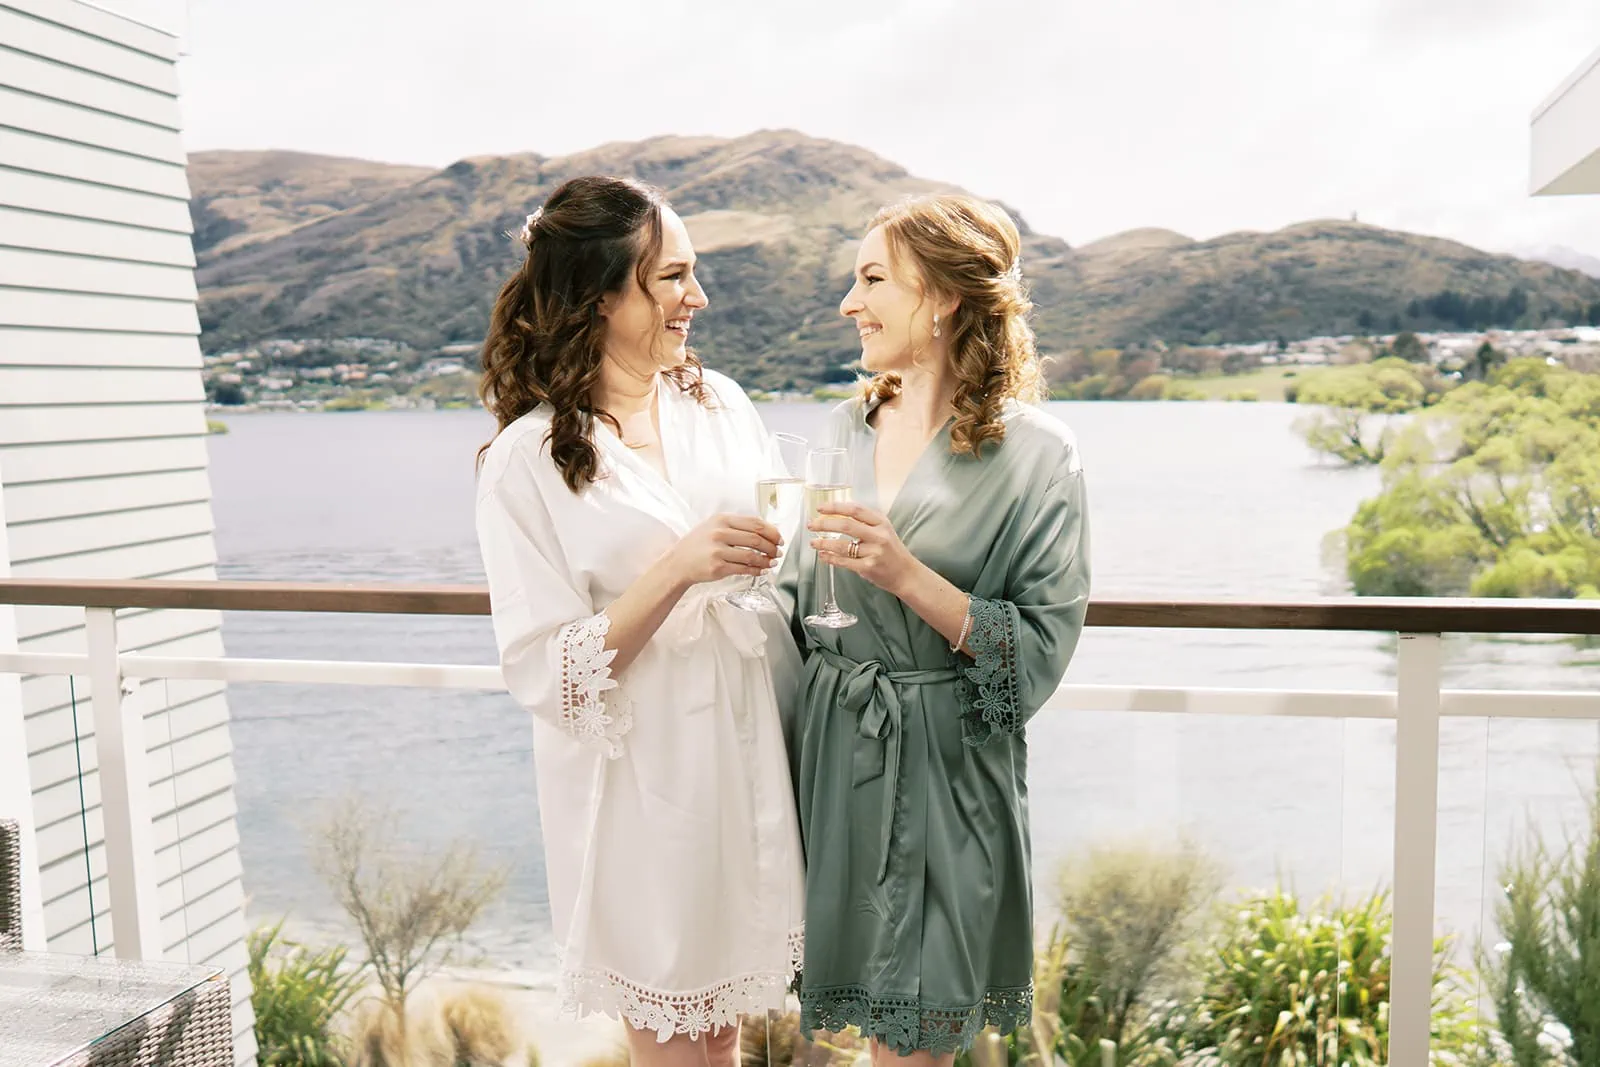 Queenstown Wedding Photographer Nat & Tim, a couple celebrating their Queenstown EloPement Wedding, are seen on a balcony overlooking Lake Wanaka. They are happily sipping champagne while wearing robes, enjoying the picturesque